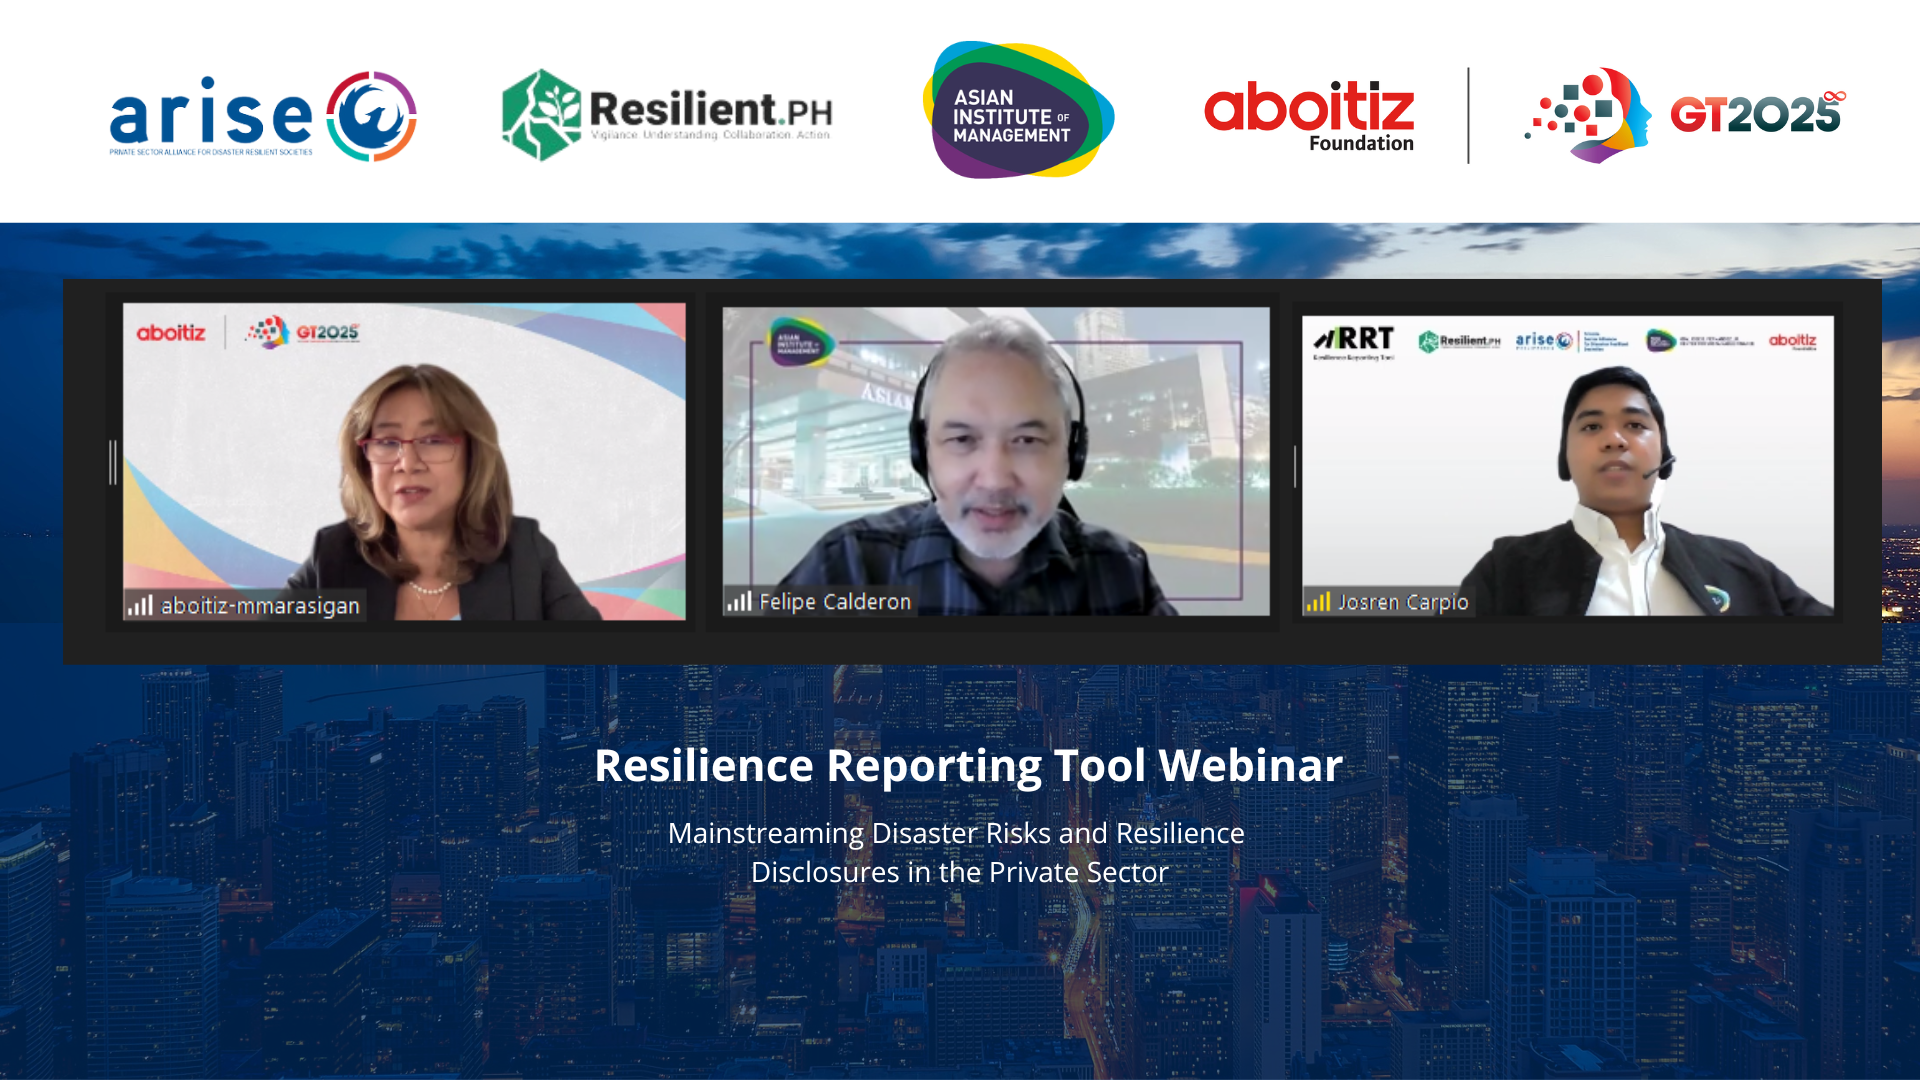 Aboitiz Foundation and Partners presented the Resilience Reporting Tool